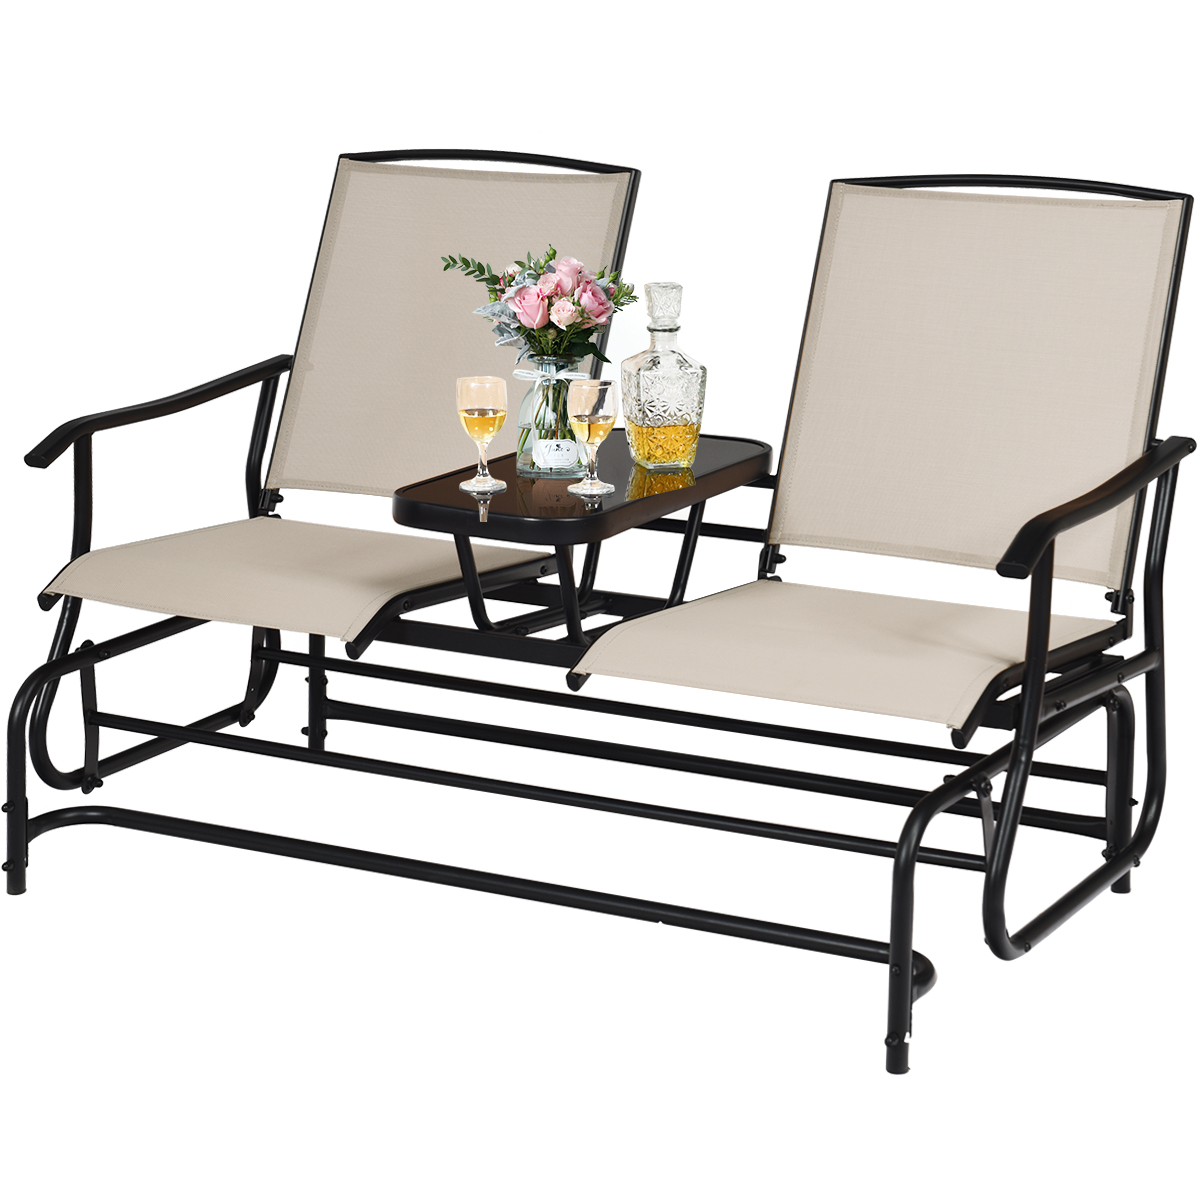 Costway 2 Person Patio Double Glider Steel Frame Loveseat Rocking with Center Table